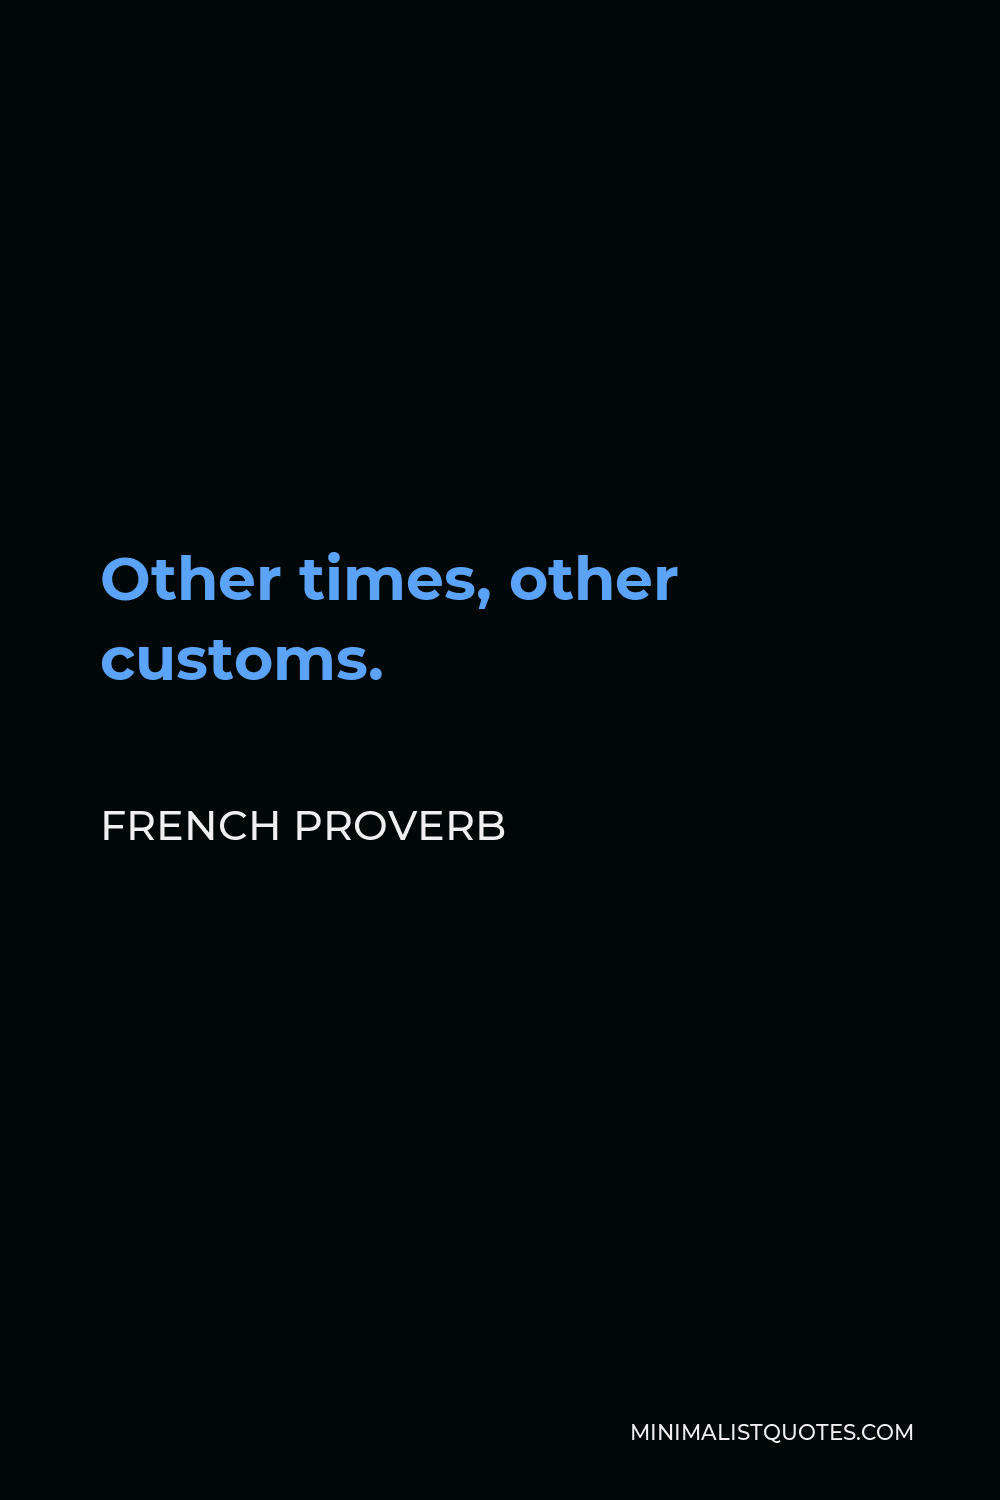 French Proverb Quote - Other times, other customs.